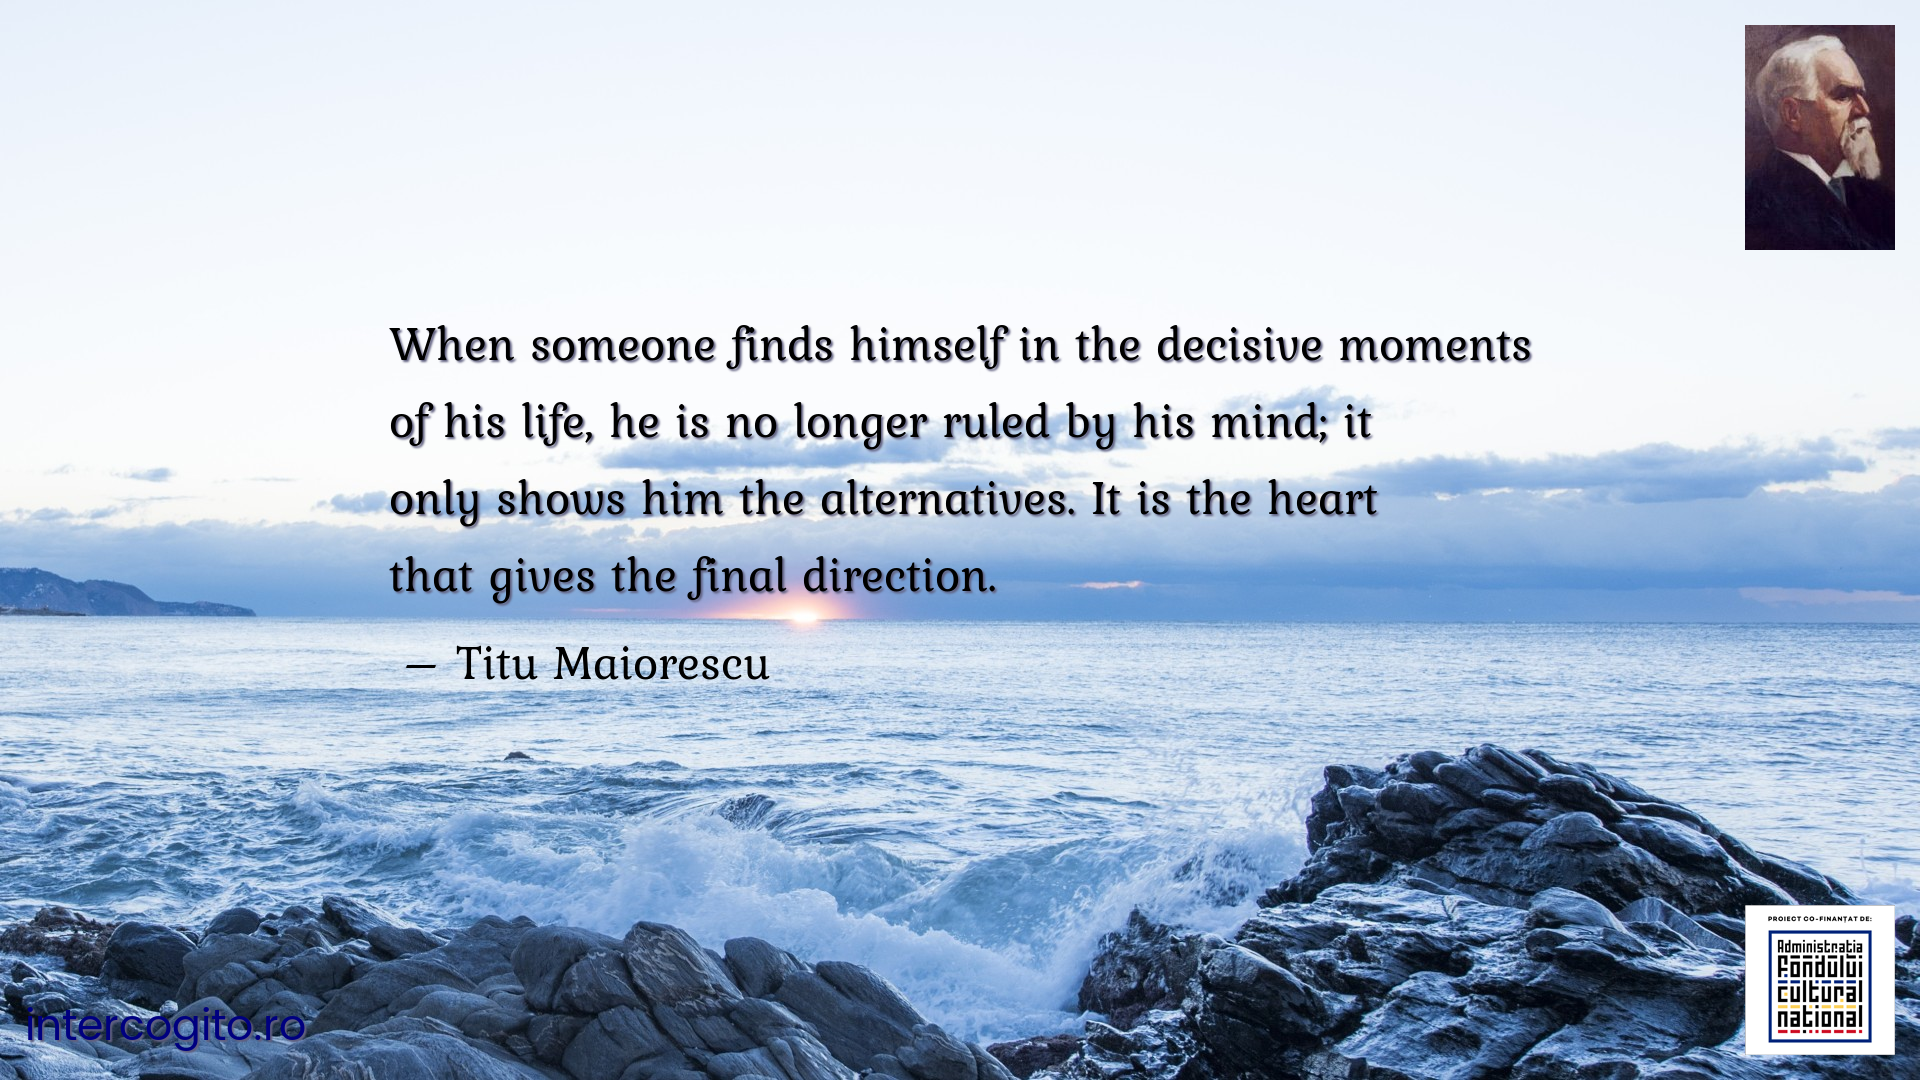 When someone finds himself in the decisive moments of his life, he is no longer ruled by his mind; it only shows him the alternatives. It is the heart that gives the final direction.